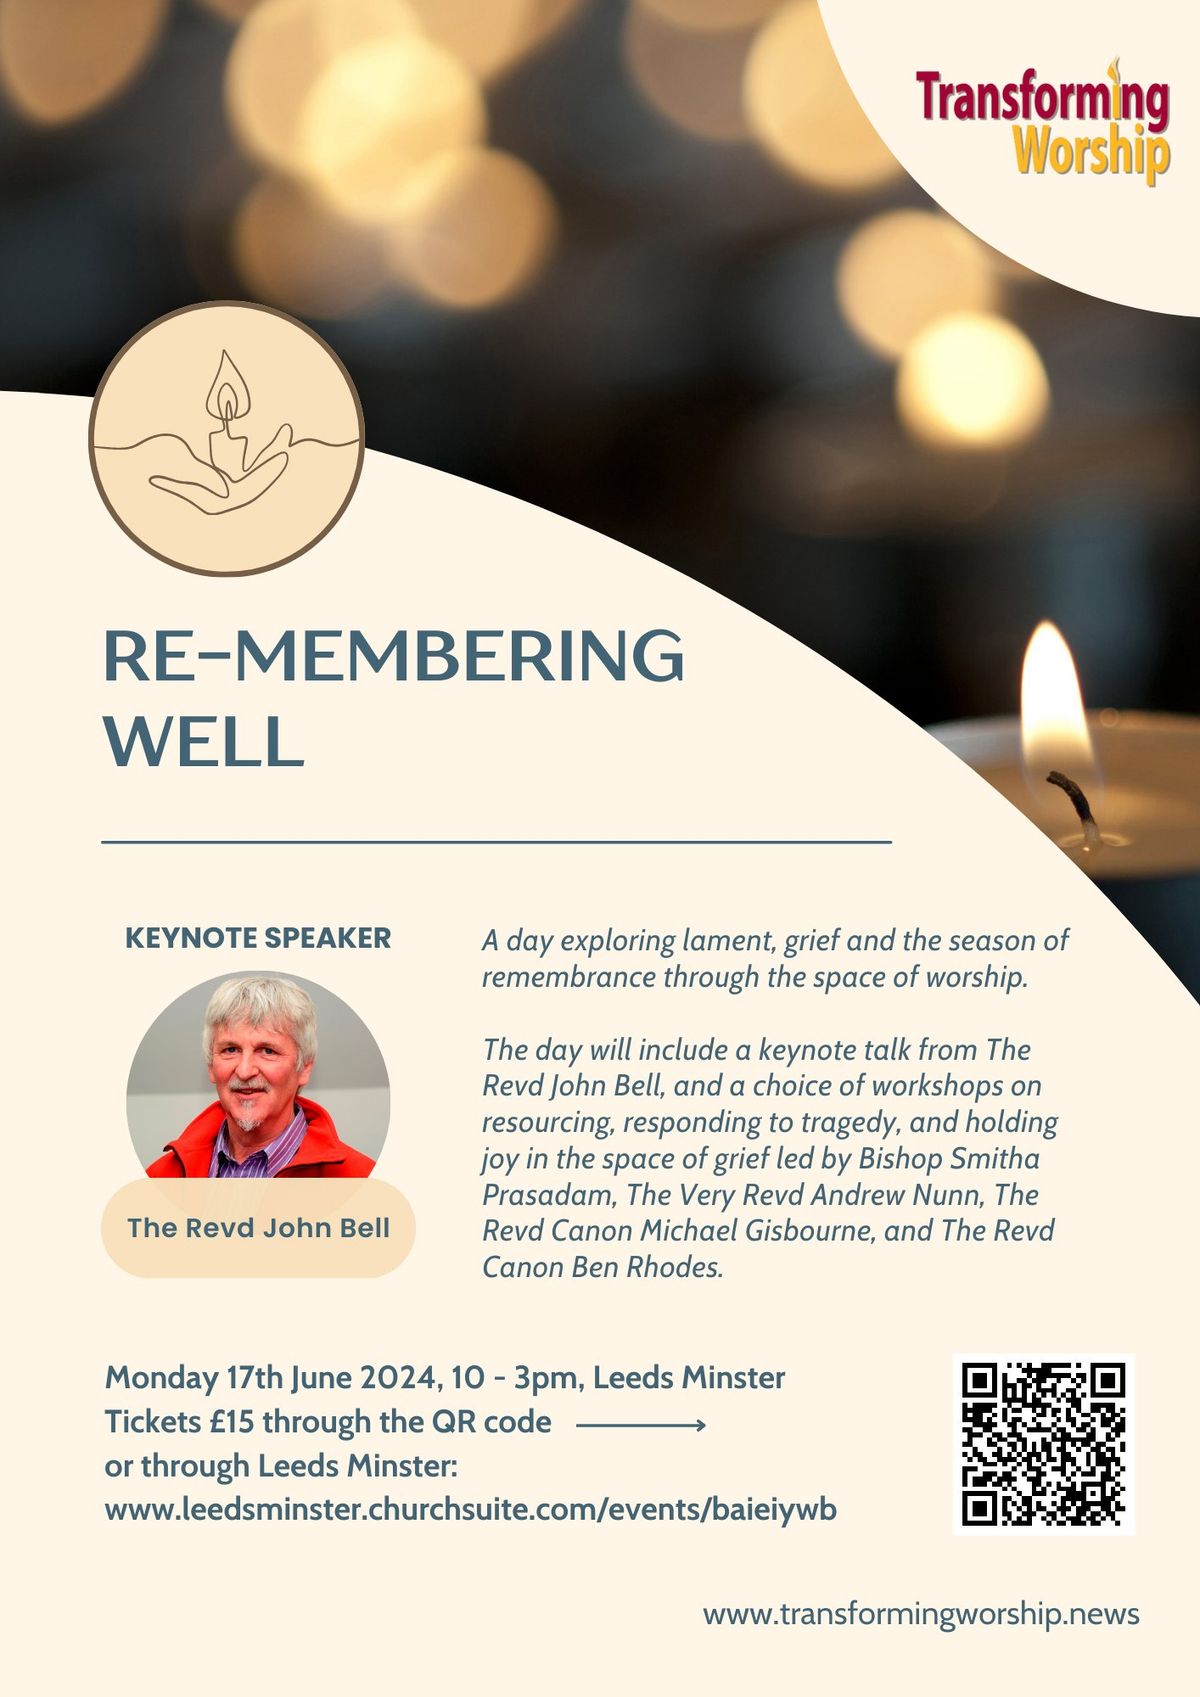 Re-Membering Well with Yorkshire Transforming Worship and The Revd John Bell